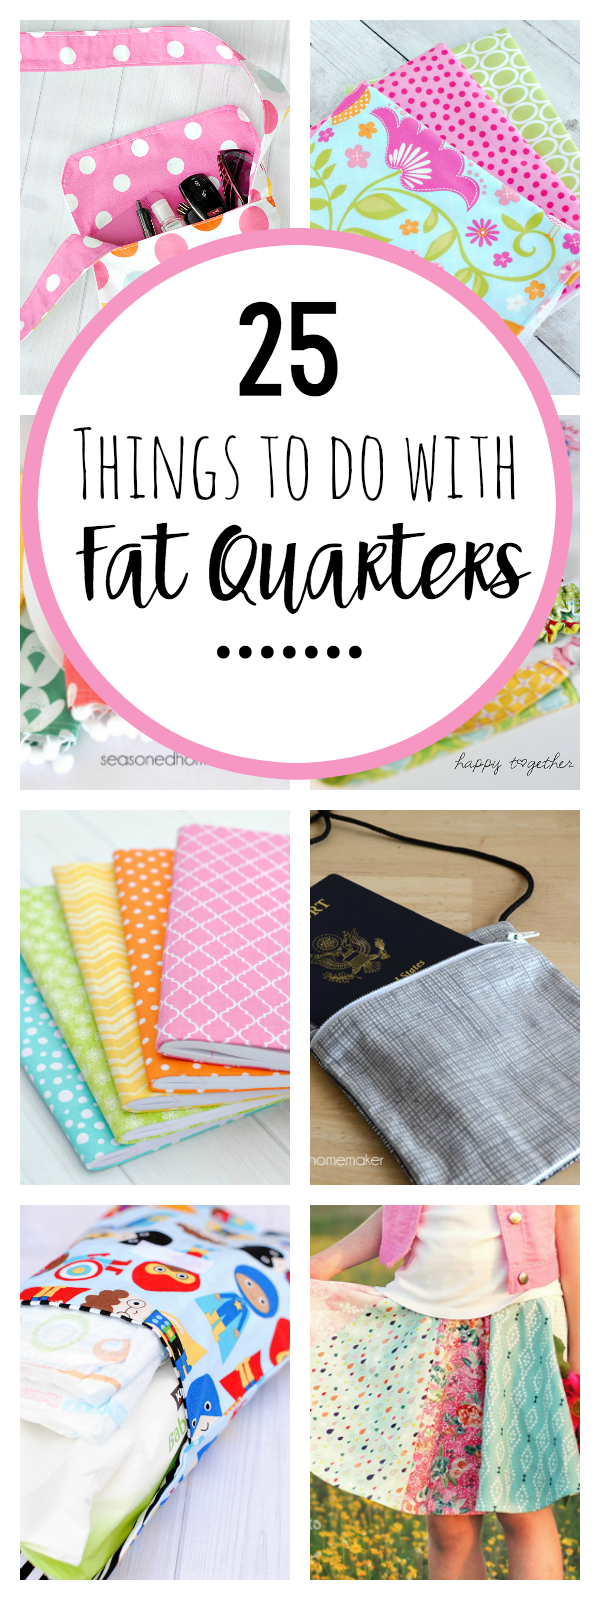 25 things to do with Fat Quarters - Crazy Little Projects -   14 fabric crafts Projects fat quarters ideas